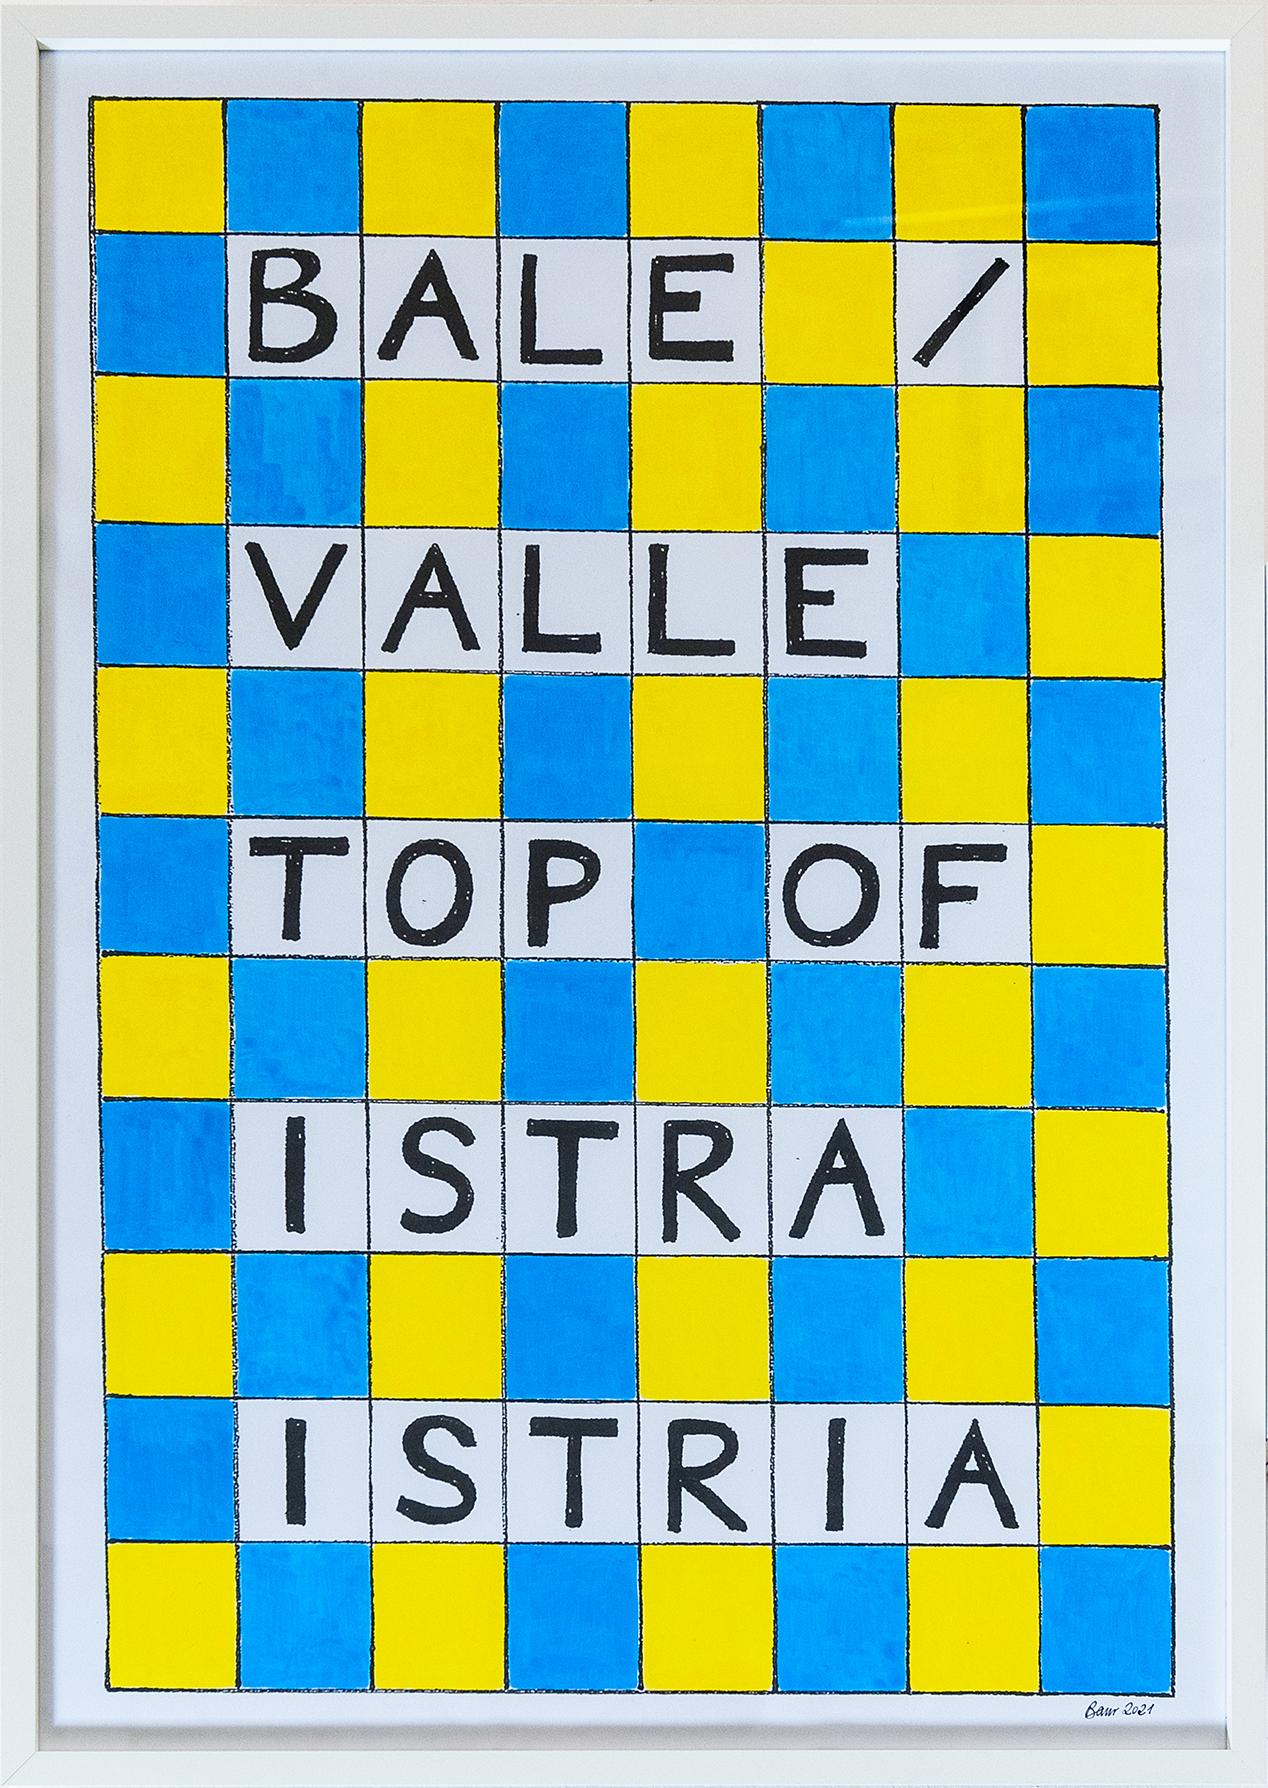 BALE / VALLE TOP OF ISTRIA